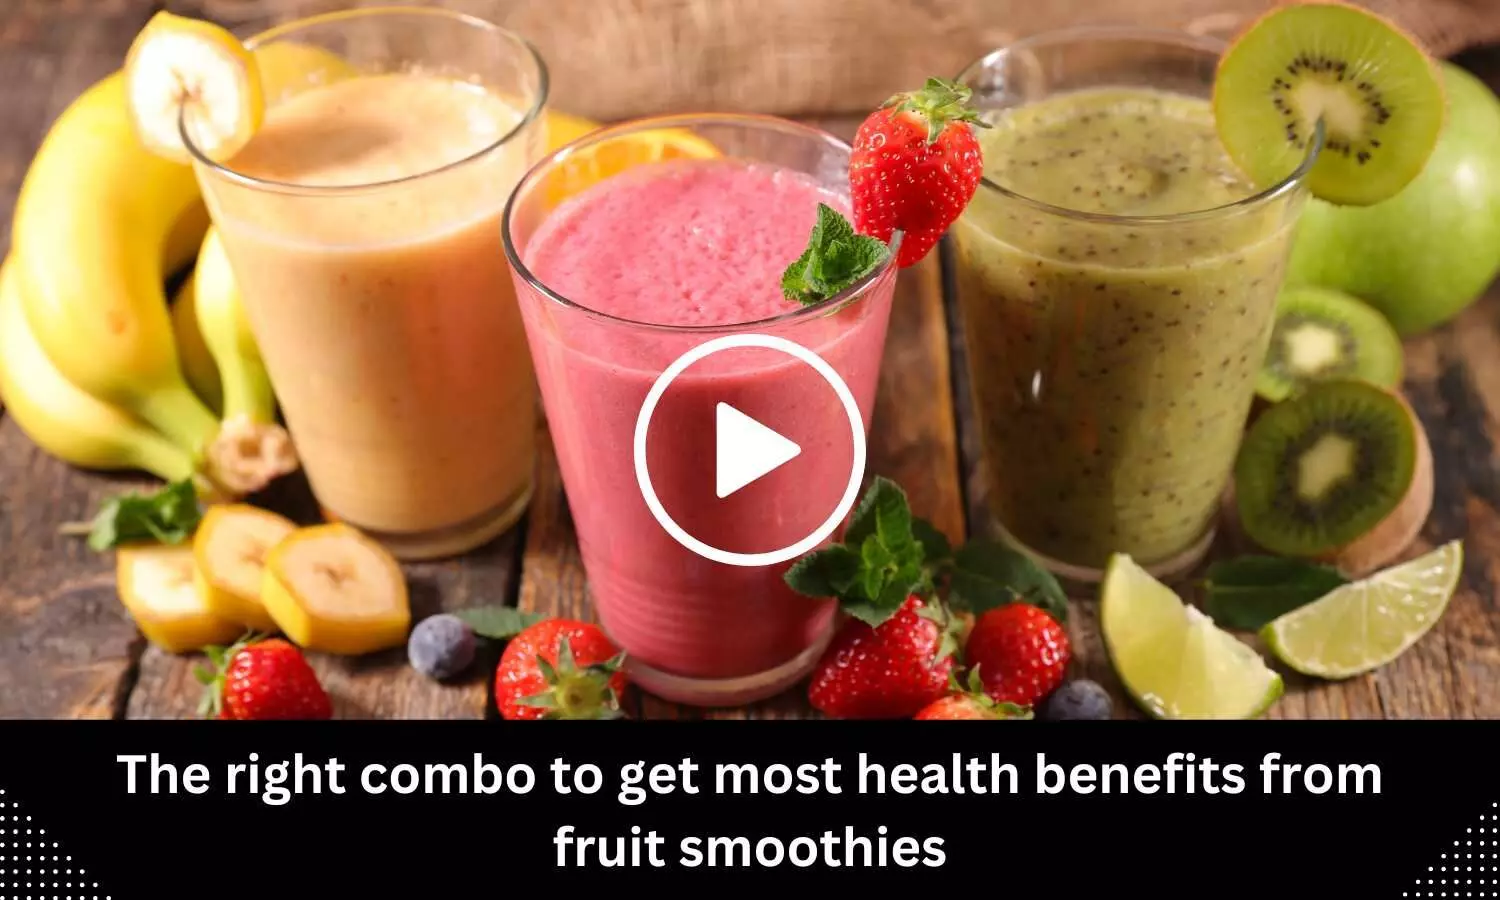 The right combo to get most health benefits from fruit smoothies